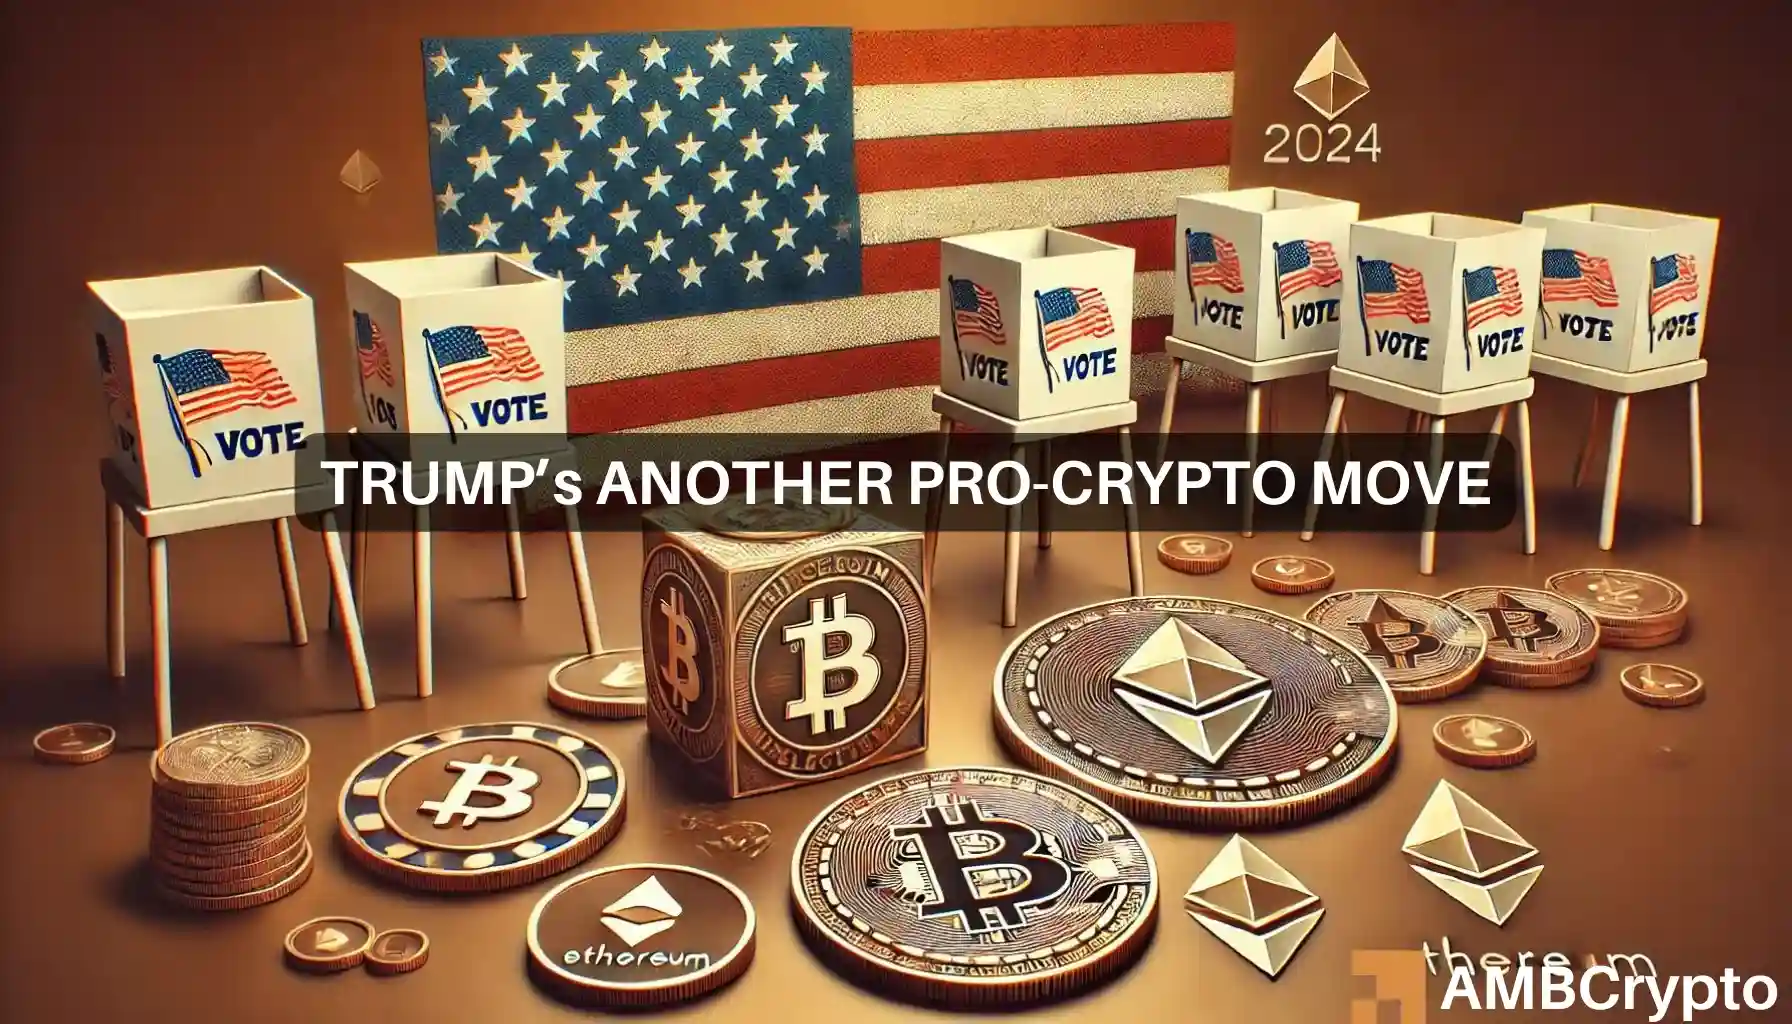 Donald Trump chooses J.D. Vance as VP candidate – Crypto community rejoices